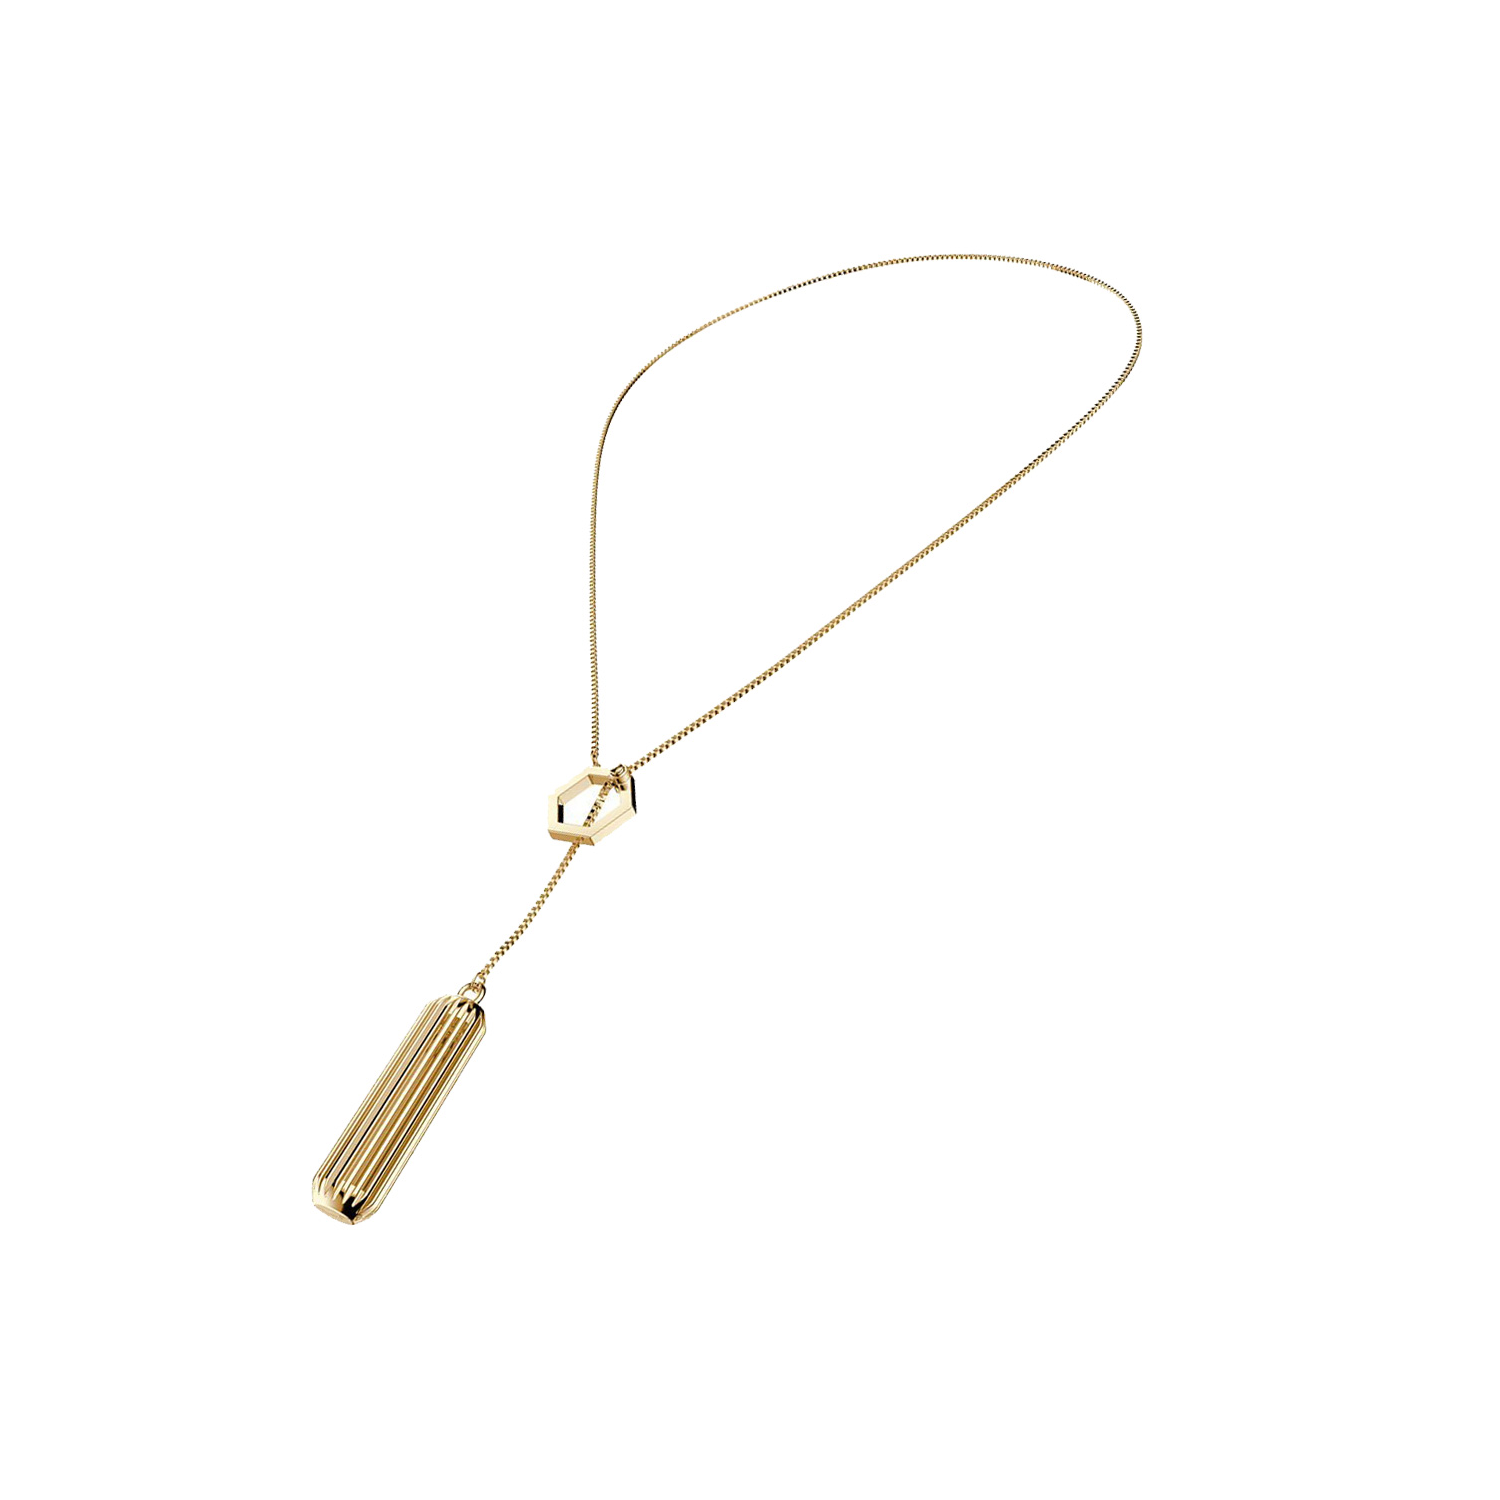 Fitbit Flex 2 Luxurious Stainless Steel Necklace in Yellow Gold